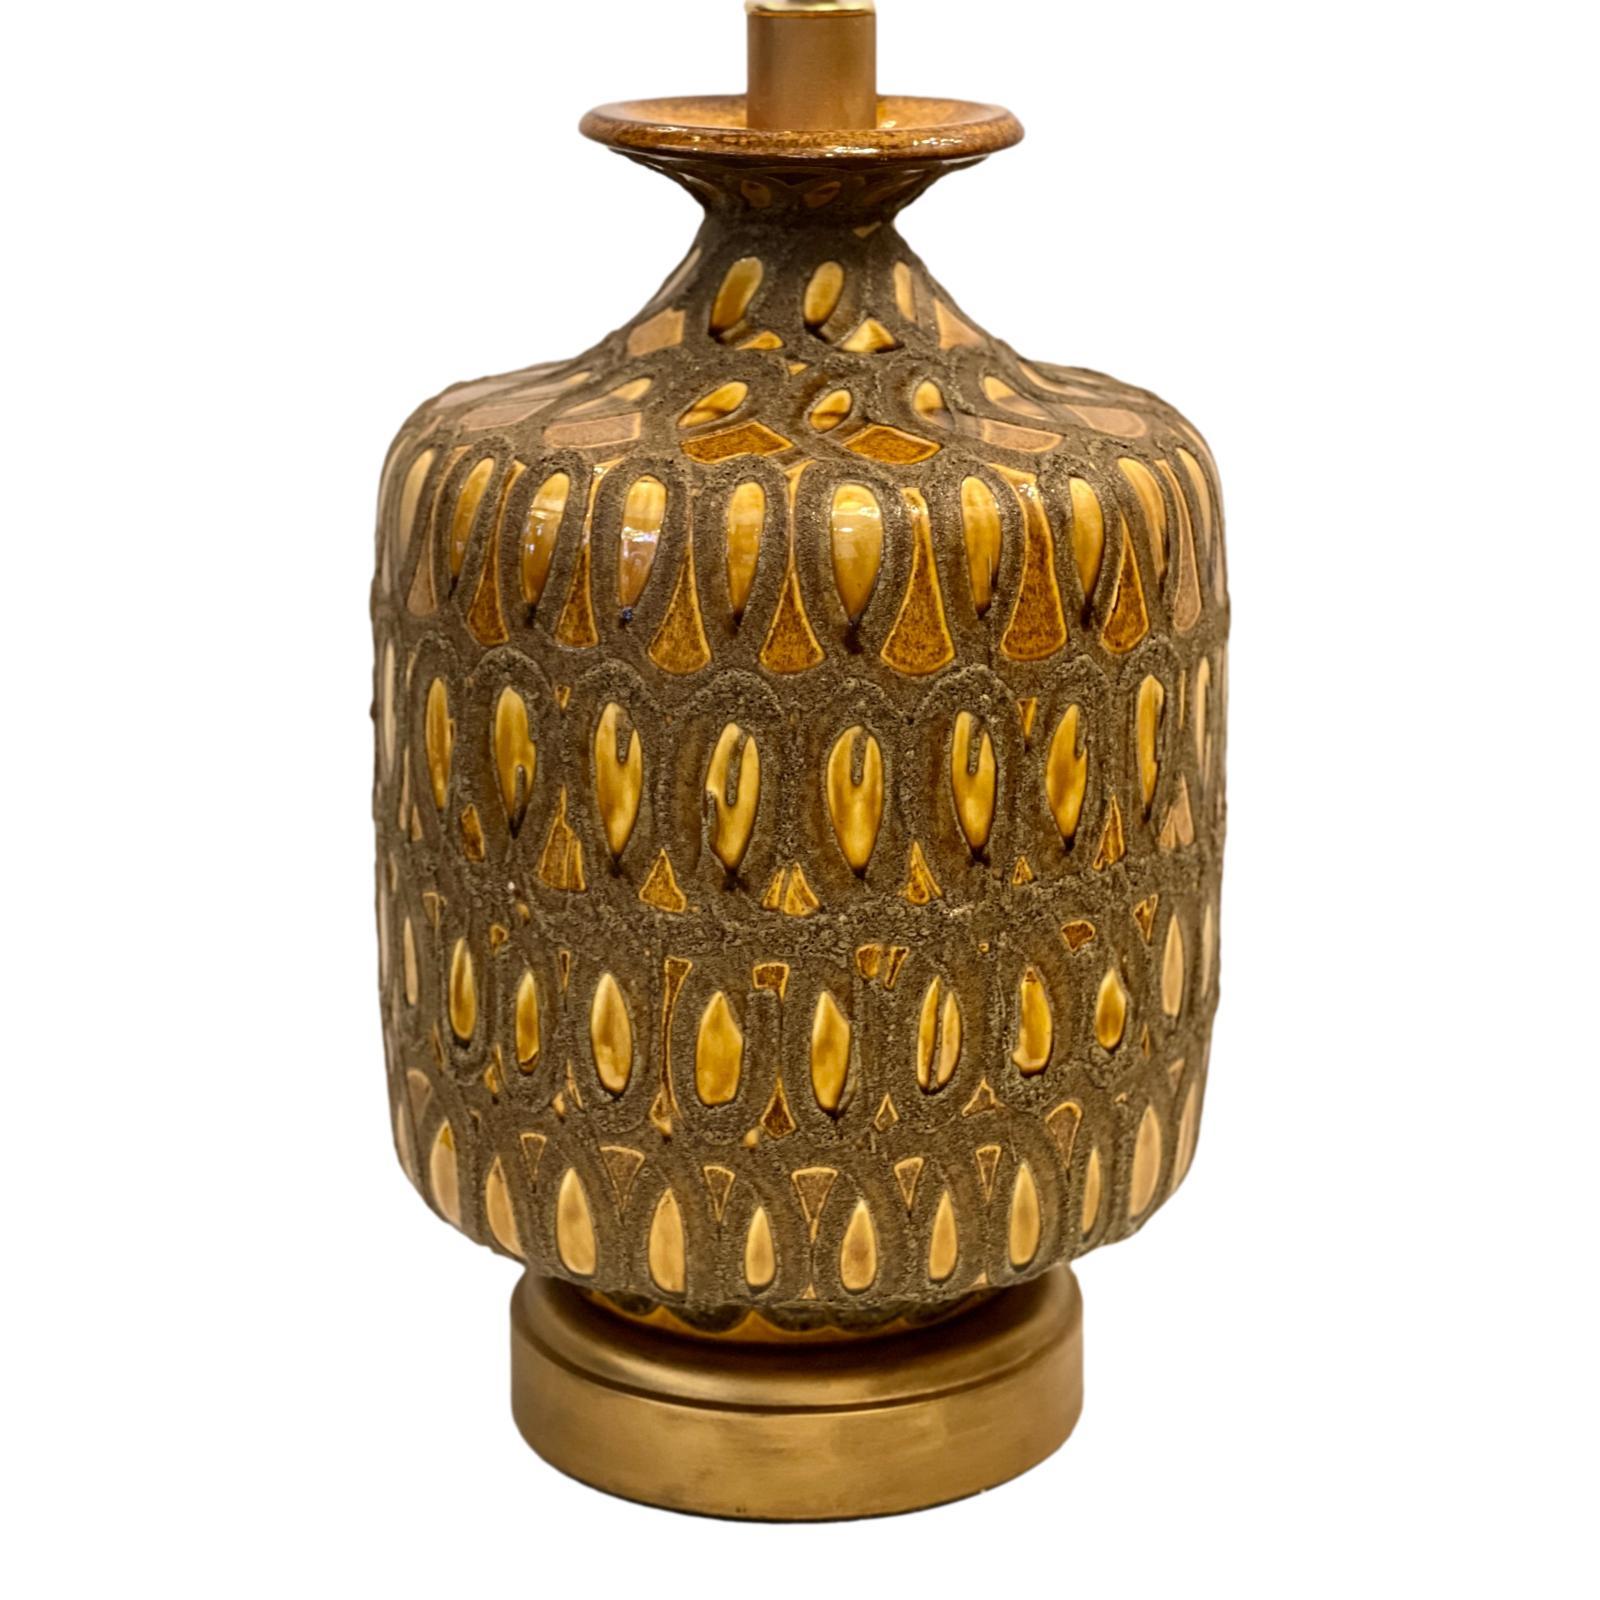 Italian circa 1960's ceramic table lamp with bronze base.

Measurements:
Height of body: 20